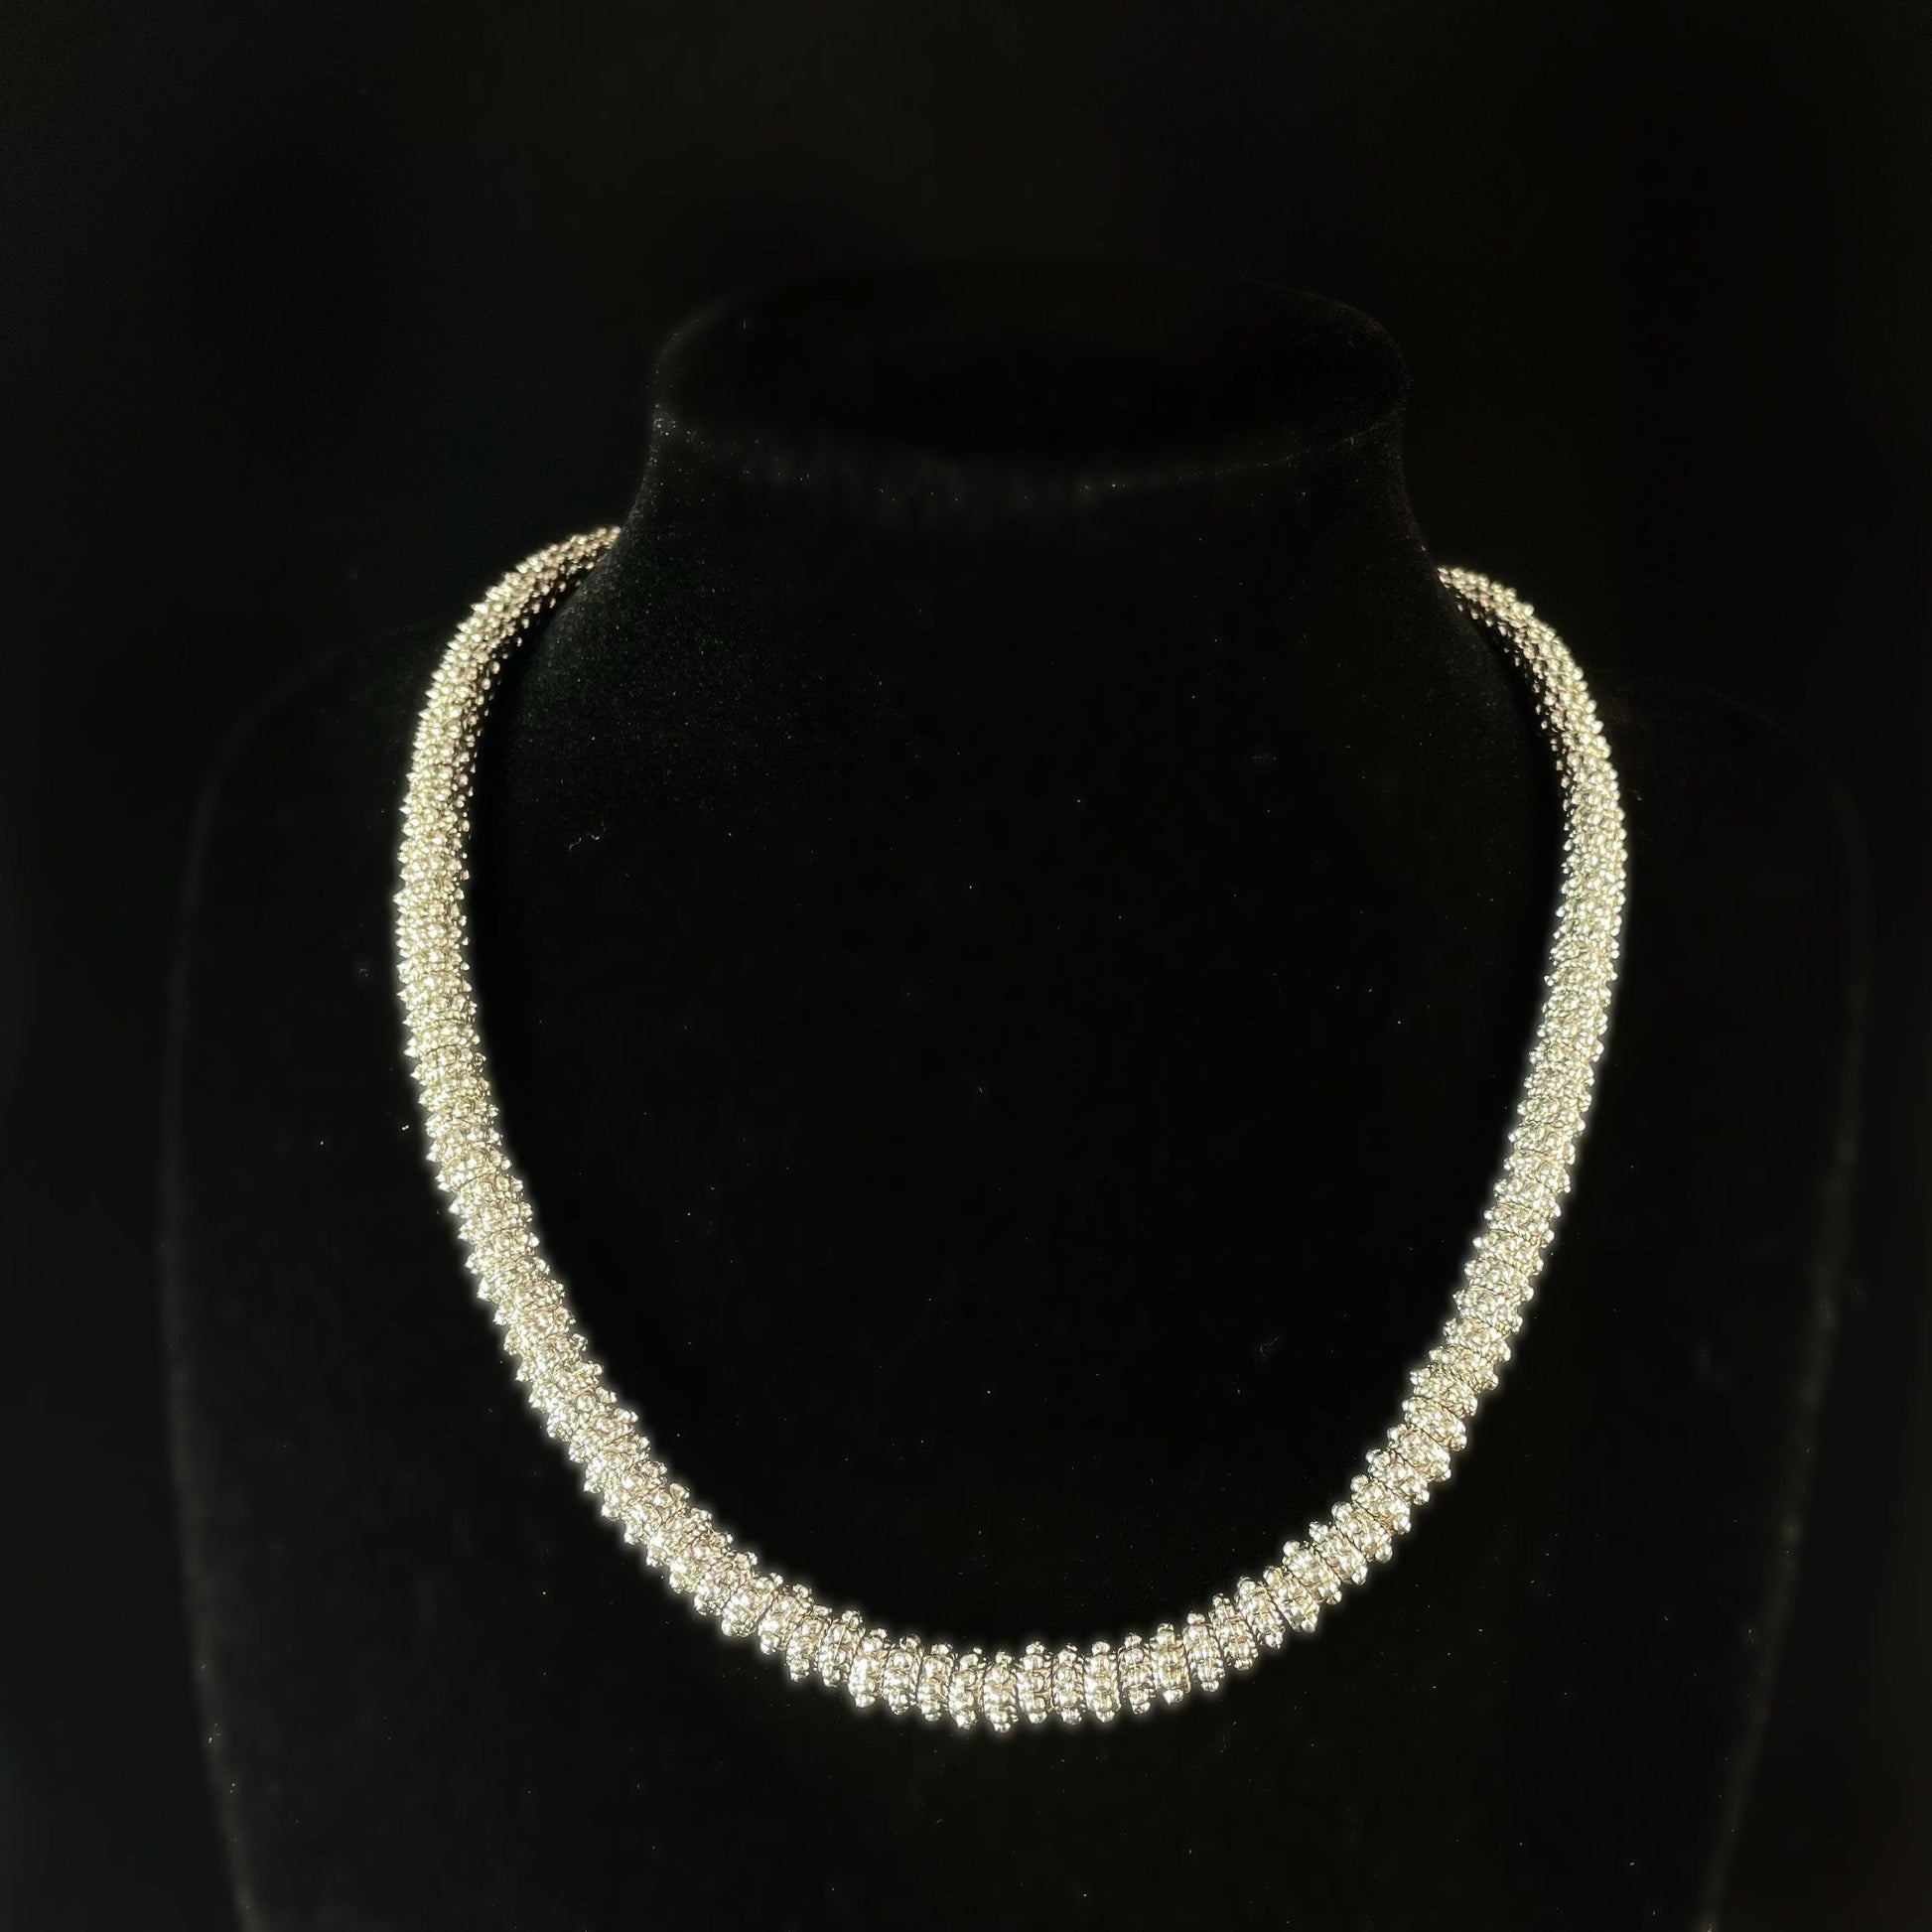 Silver Textured Necklace - Handmade in Spain